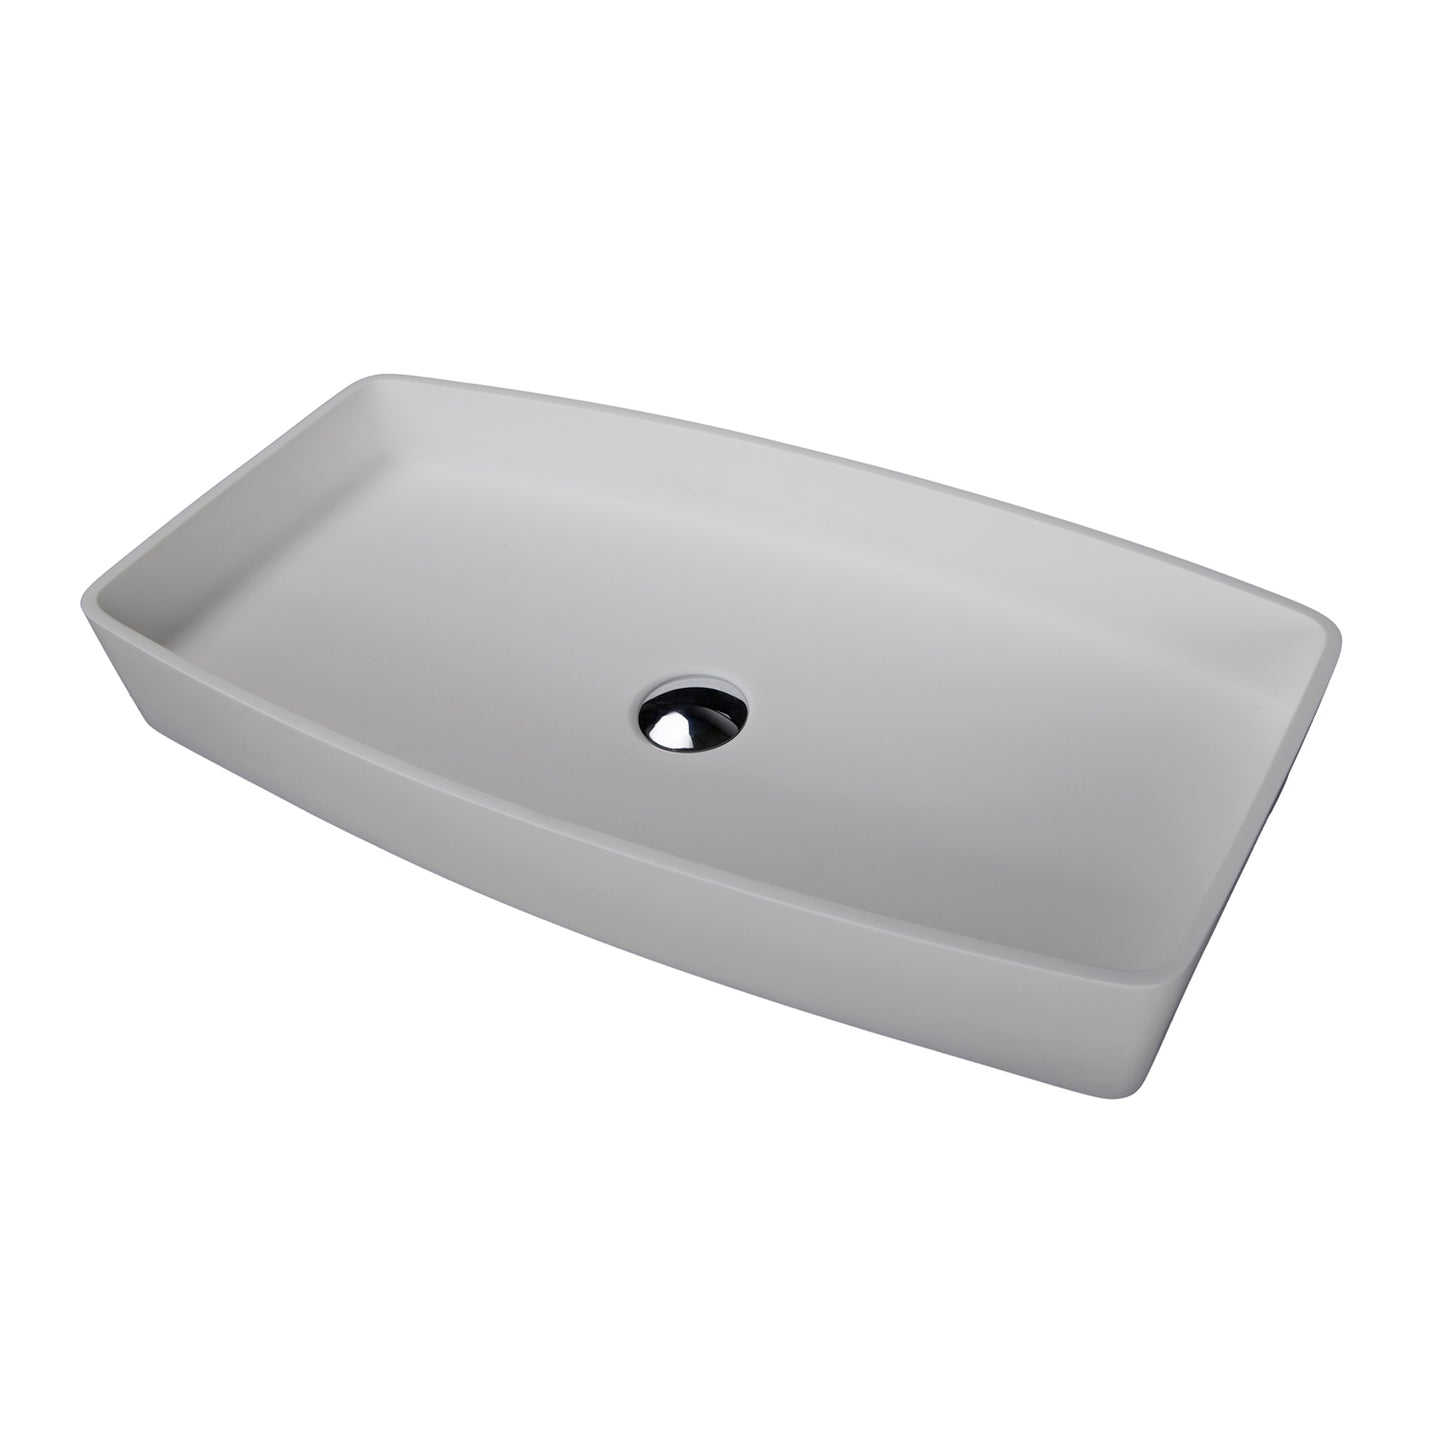 Marbella Resin 27" x 14-1/2" Rectangle Vessel Sink with Matte White Finish